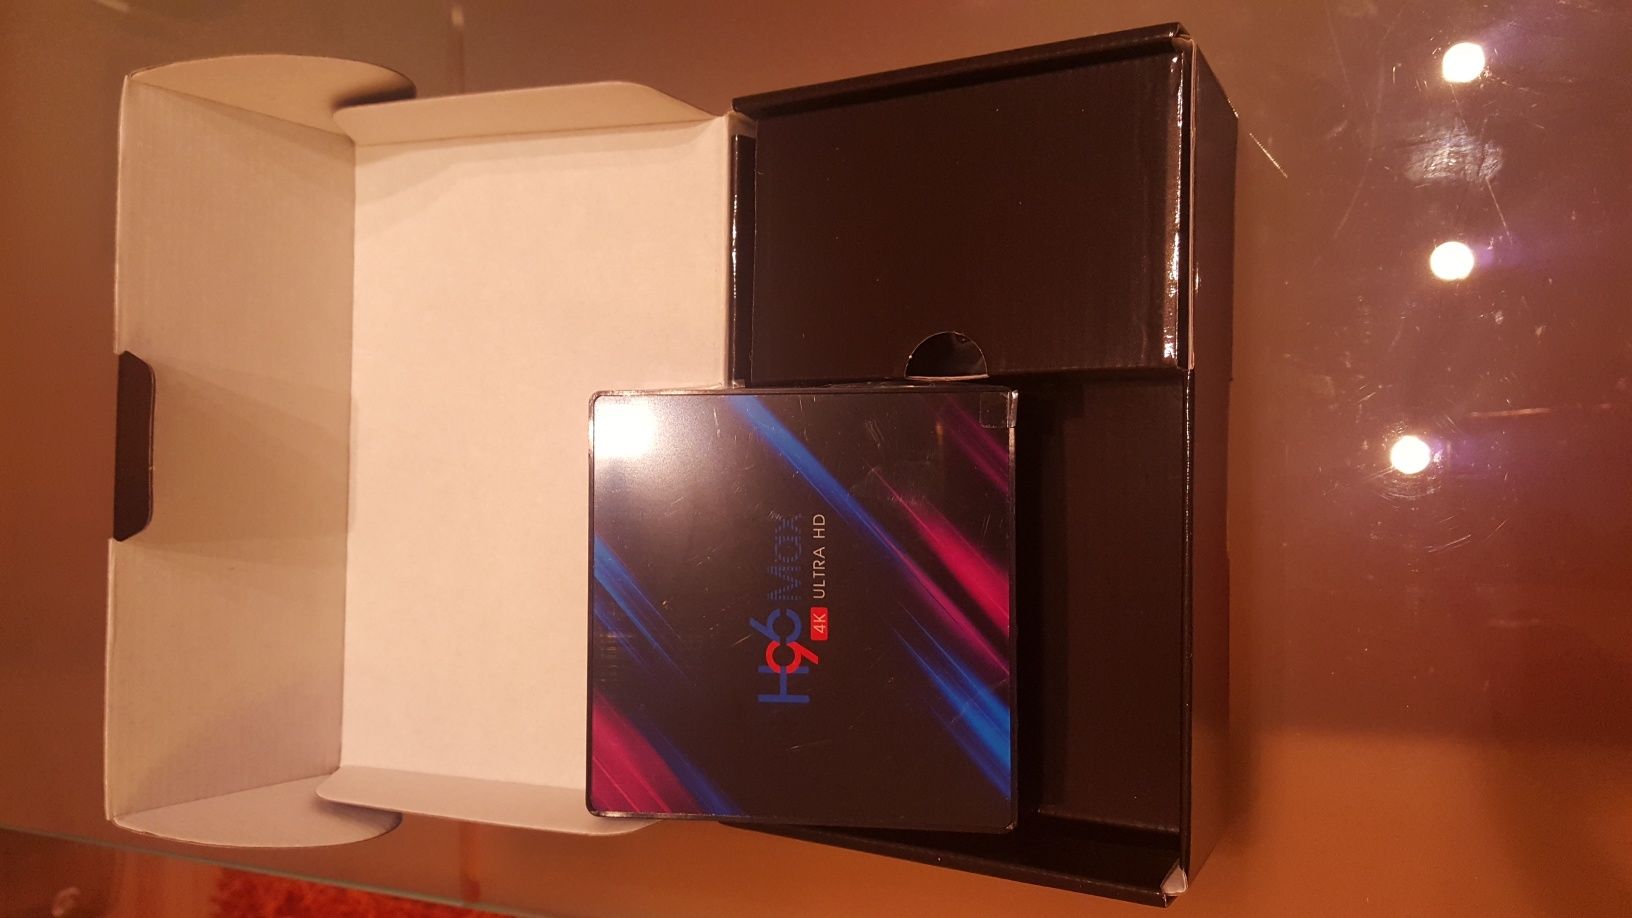 Boxs Android Novas 4gb/32gb android 10.0 wifi 5g